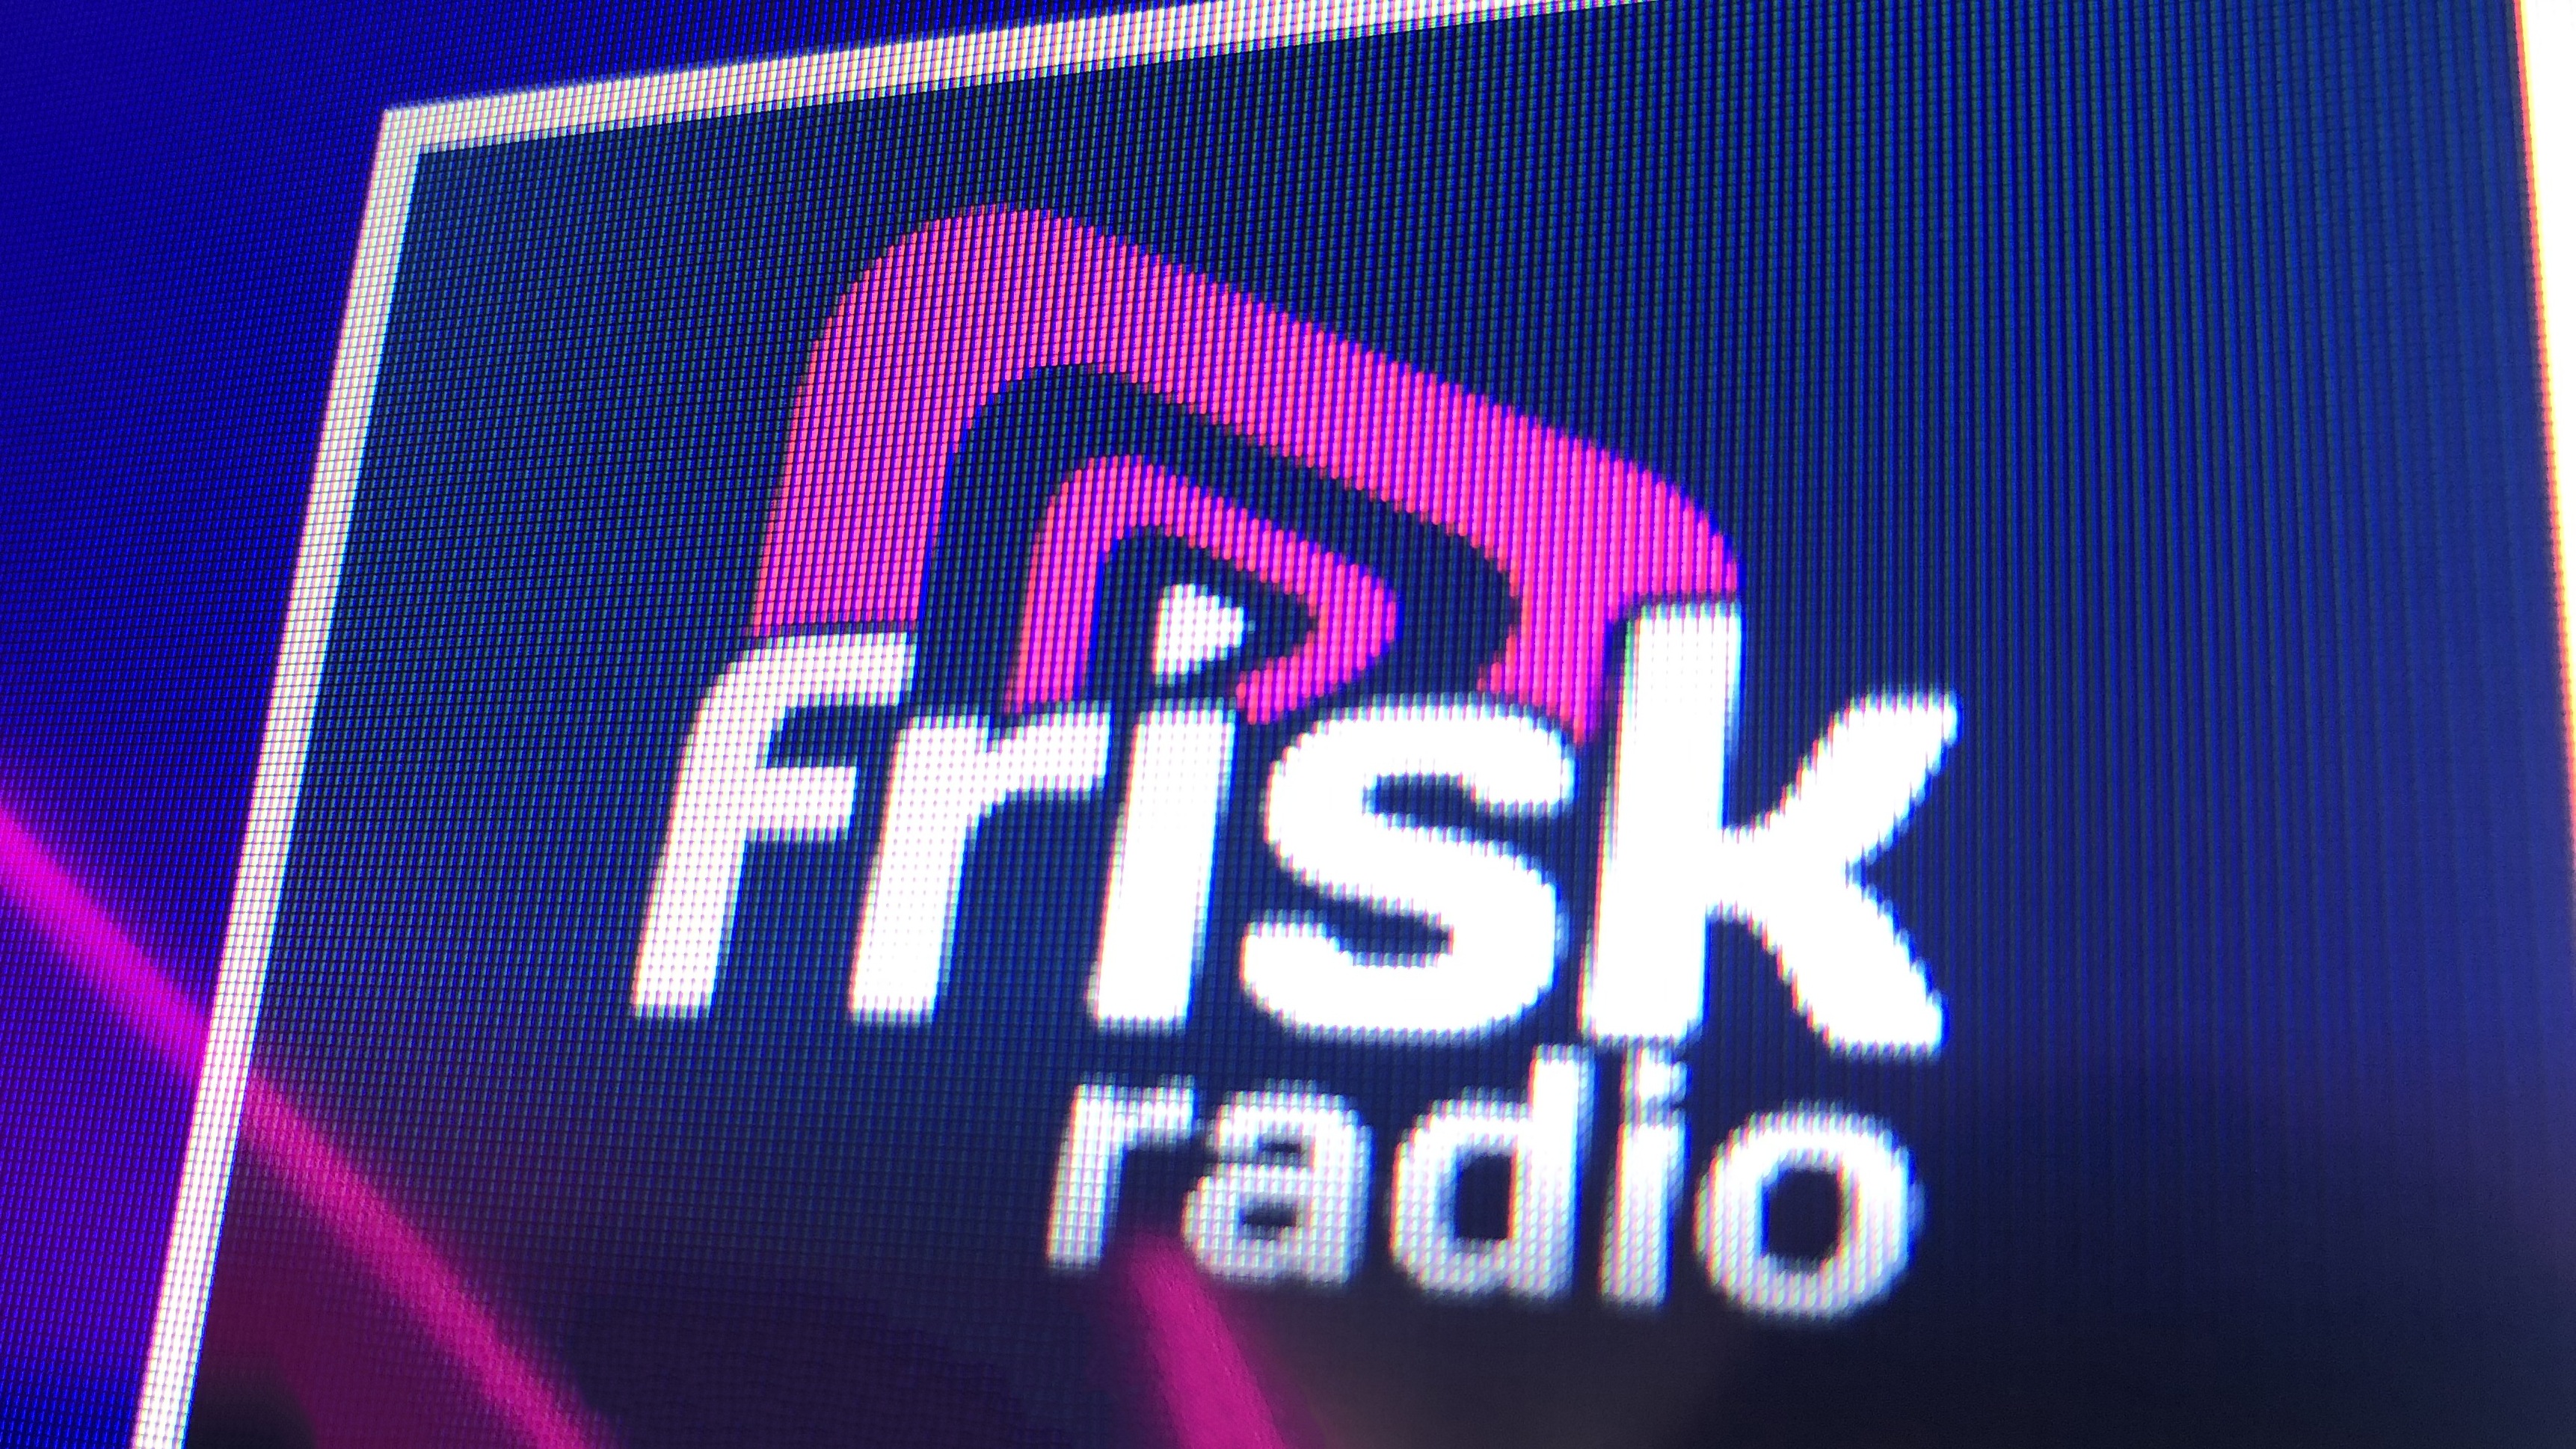 How Do I Listen to Frisk Radio on Freeview at Frisk Radio - The Rhythm of The North East